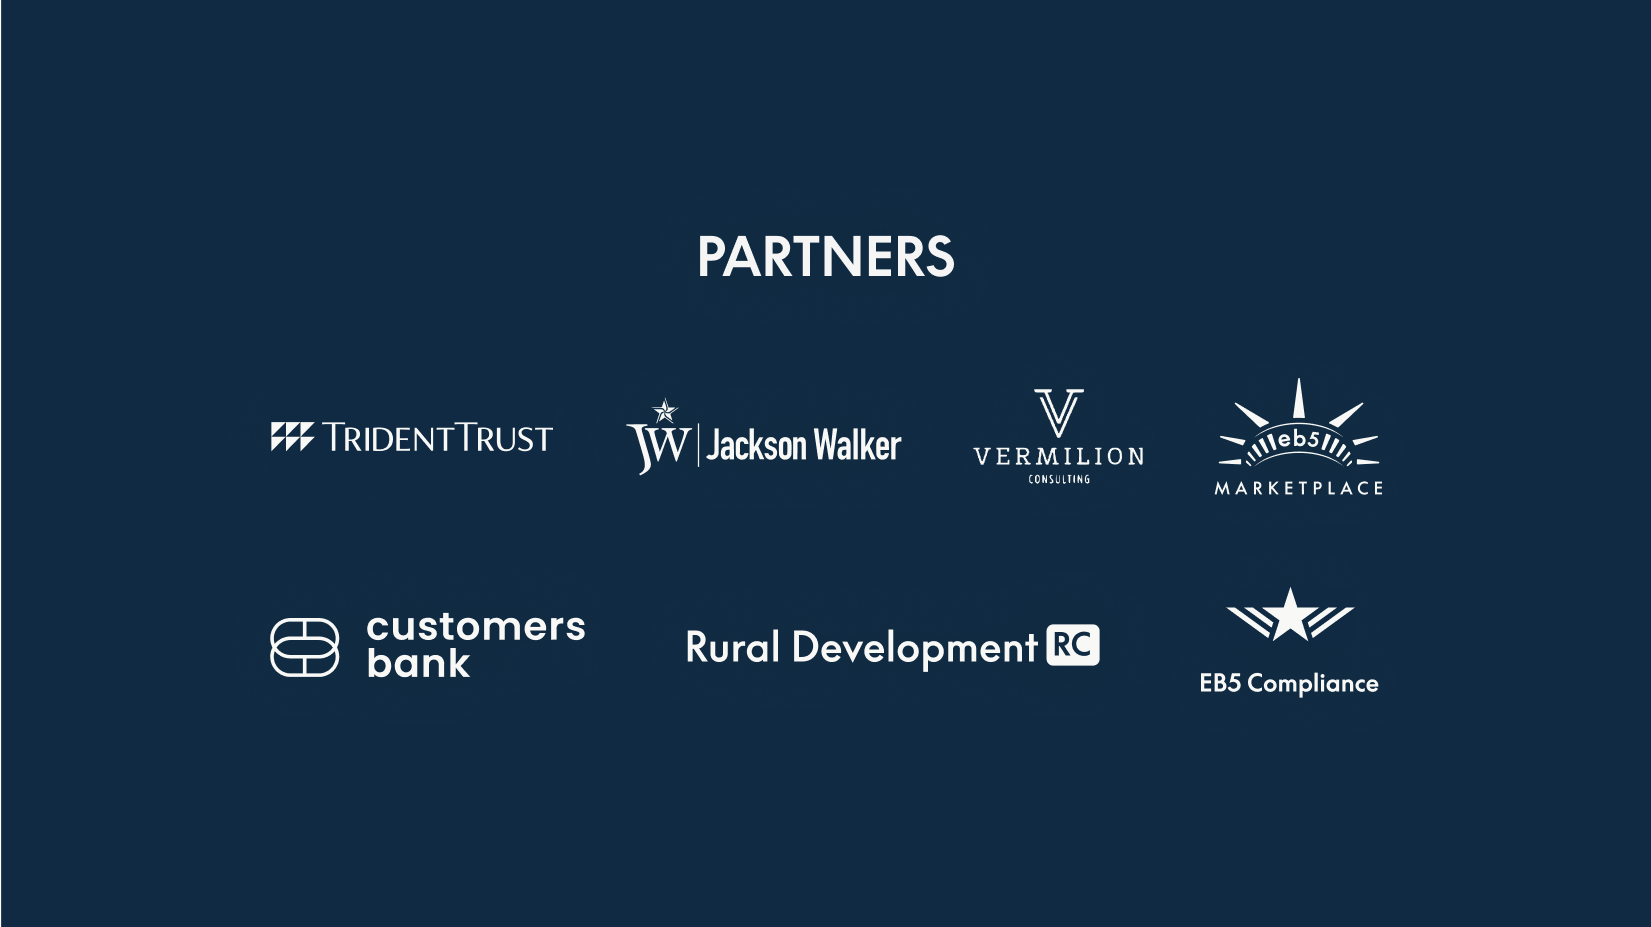 Industry-leading Partners